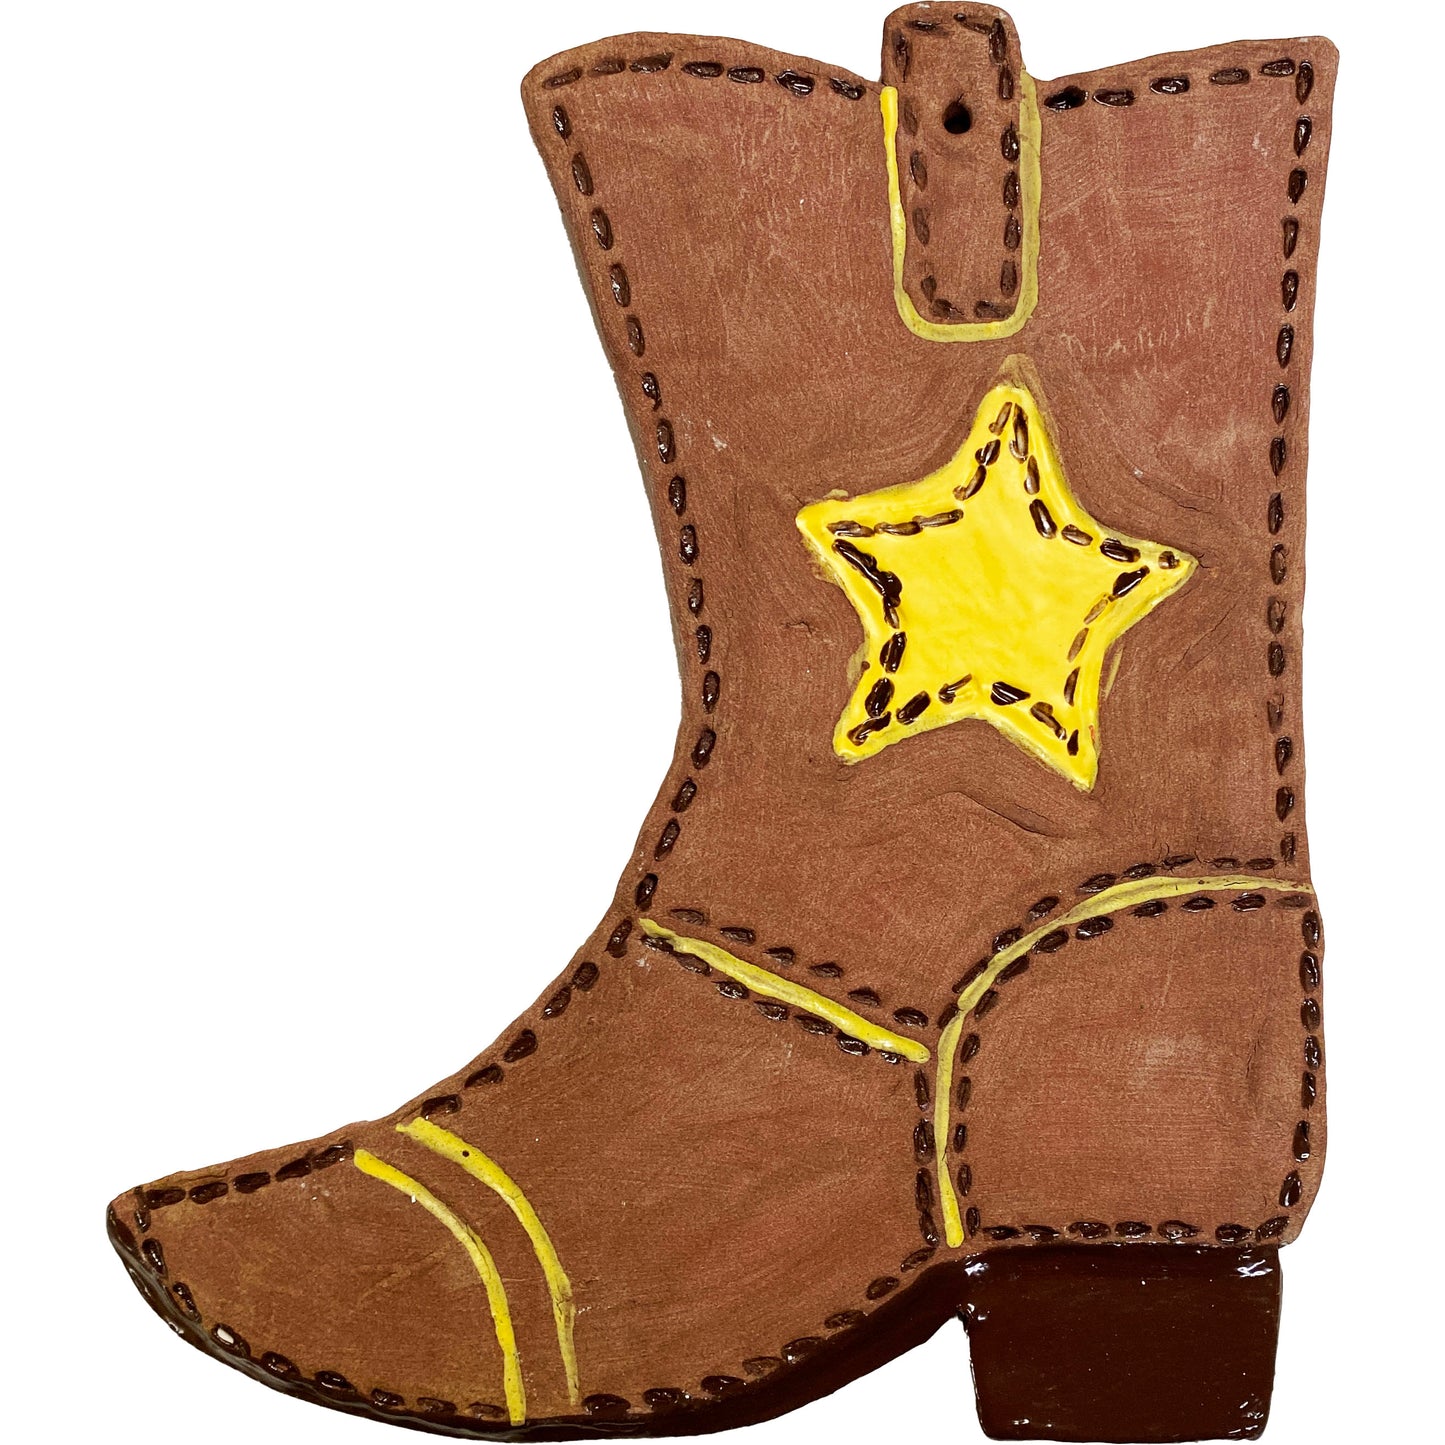 Ceramic Arts Handmade Clay Crafts Glazed 8-inch x 7-inch Cowboy Boot made by Lisa Uptain